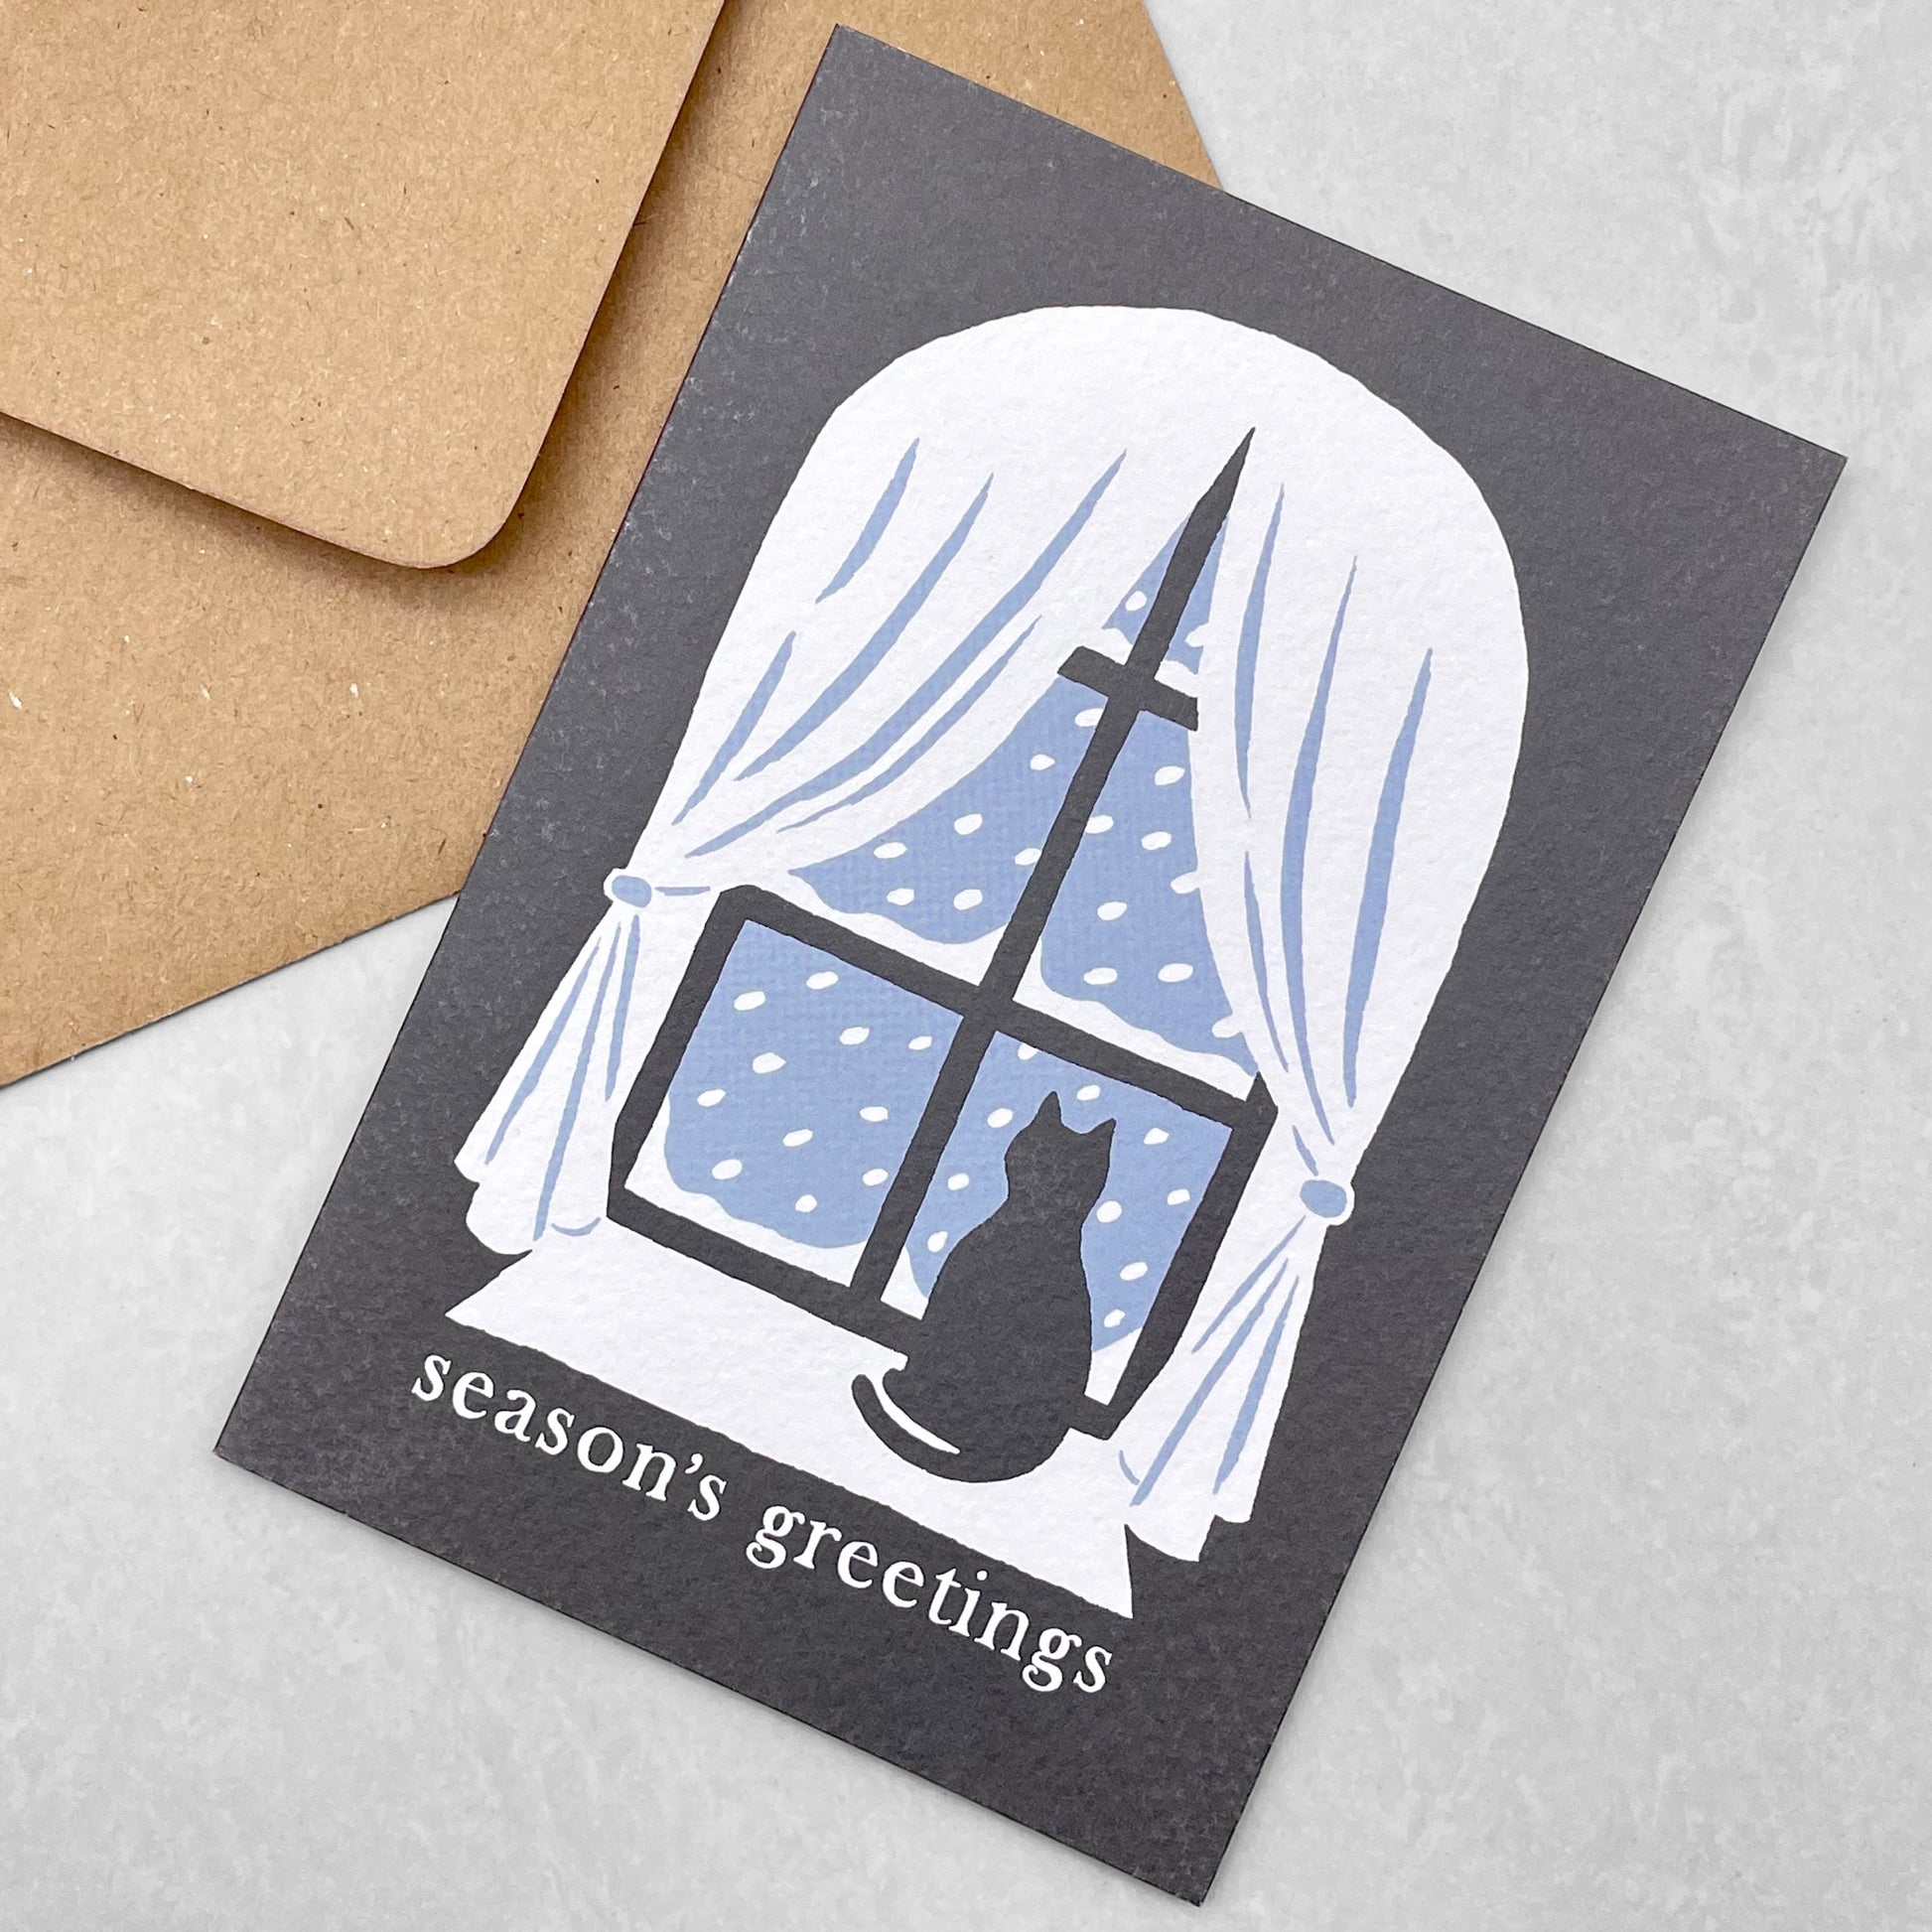 Season's greetings greetings card with a black cat looking out of a window at the snow, by Ariana Martin